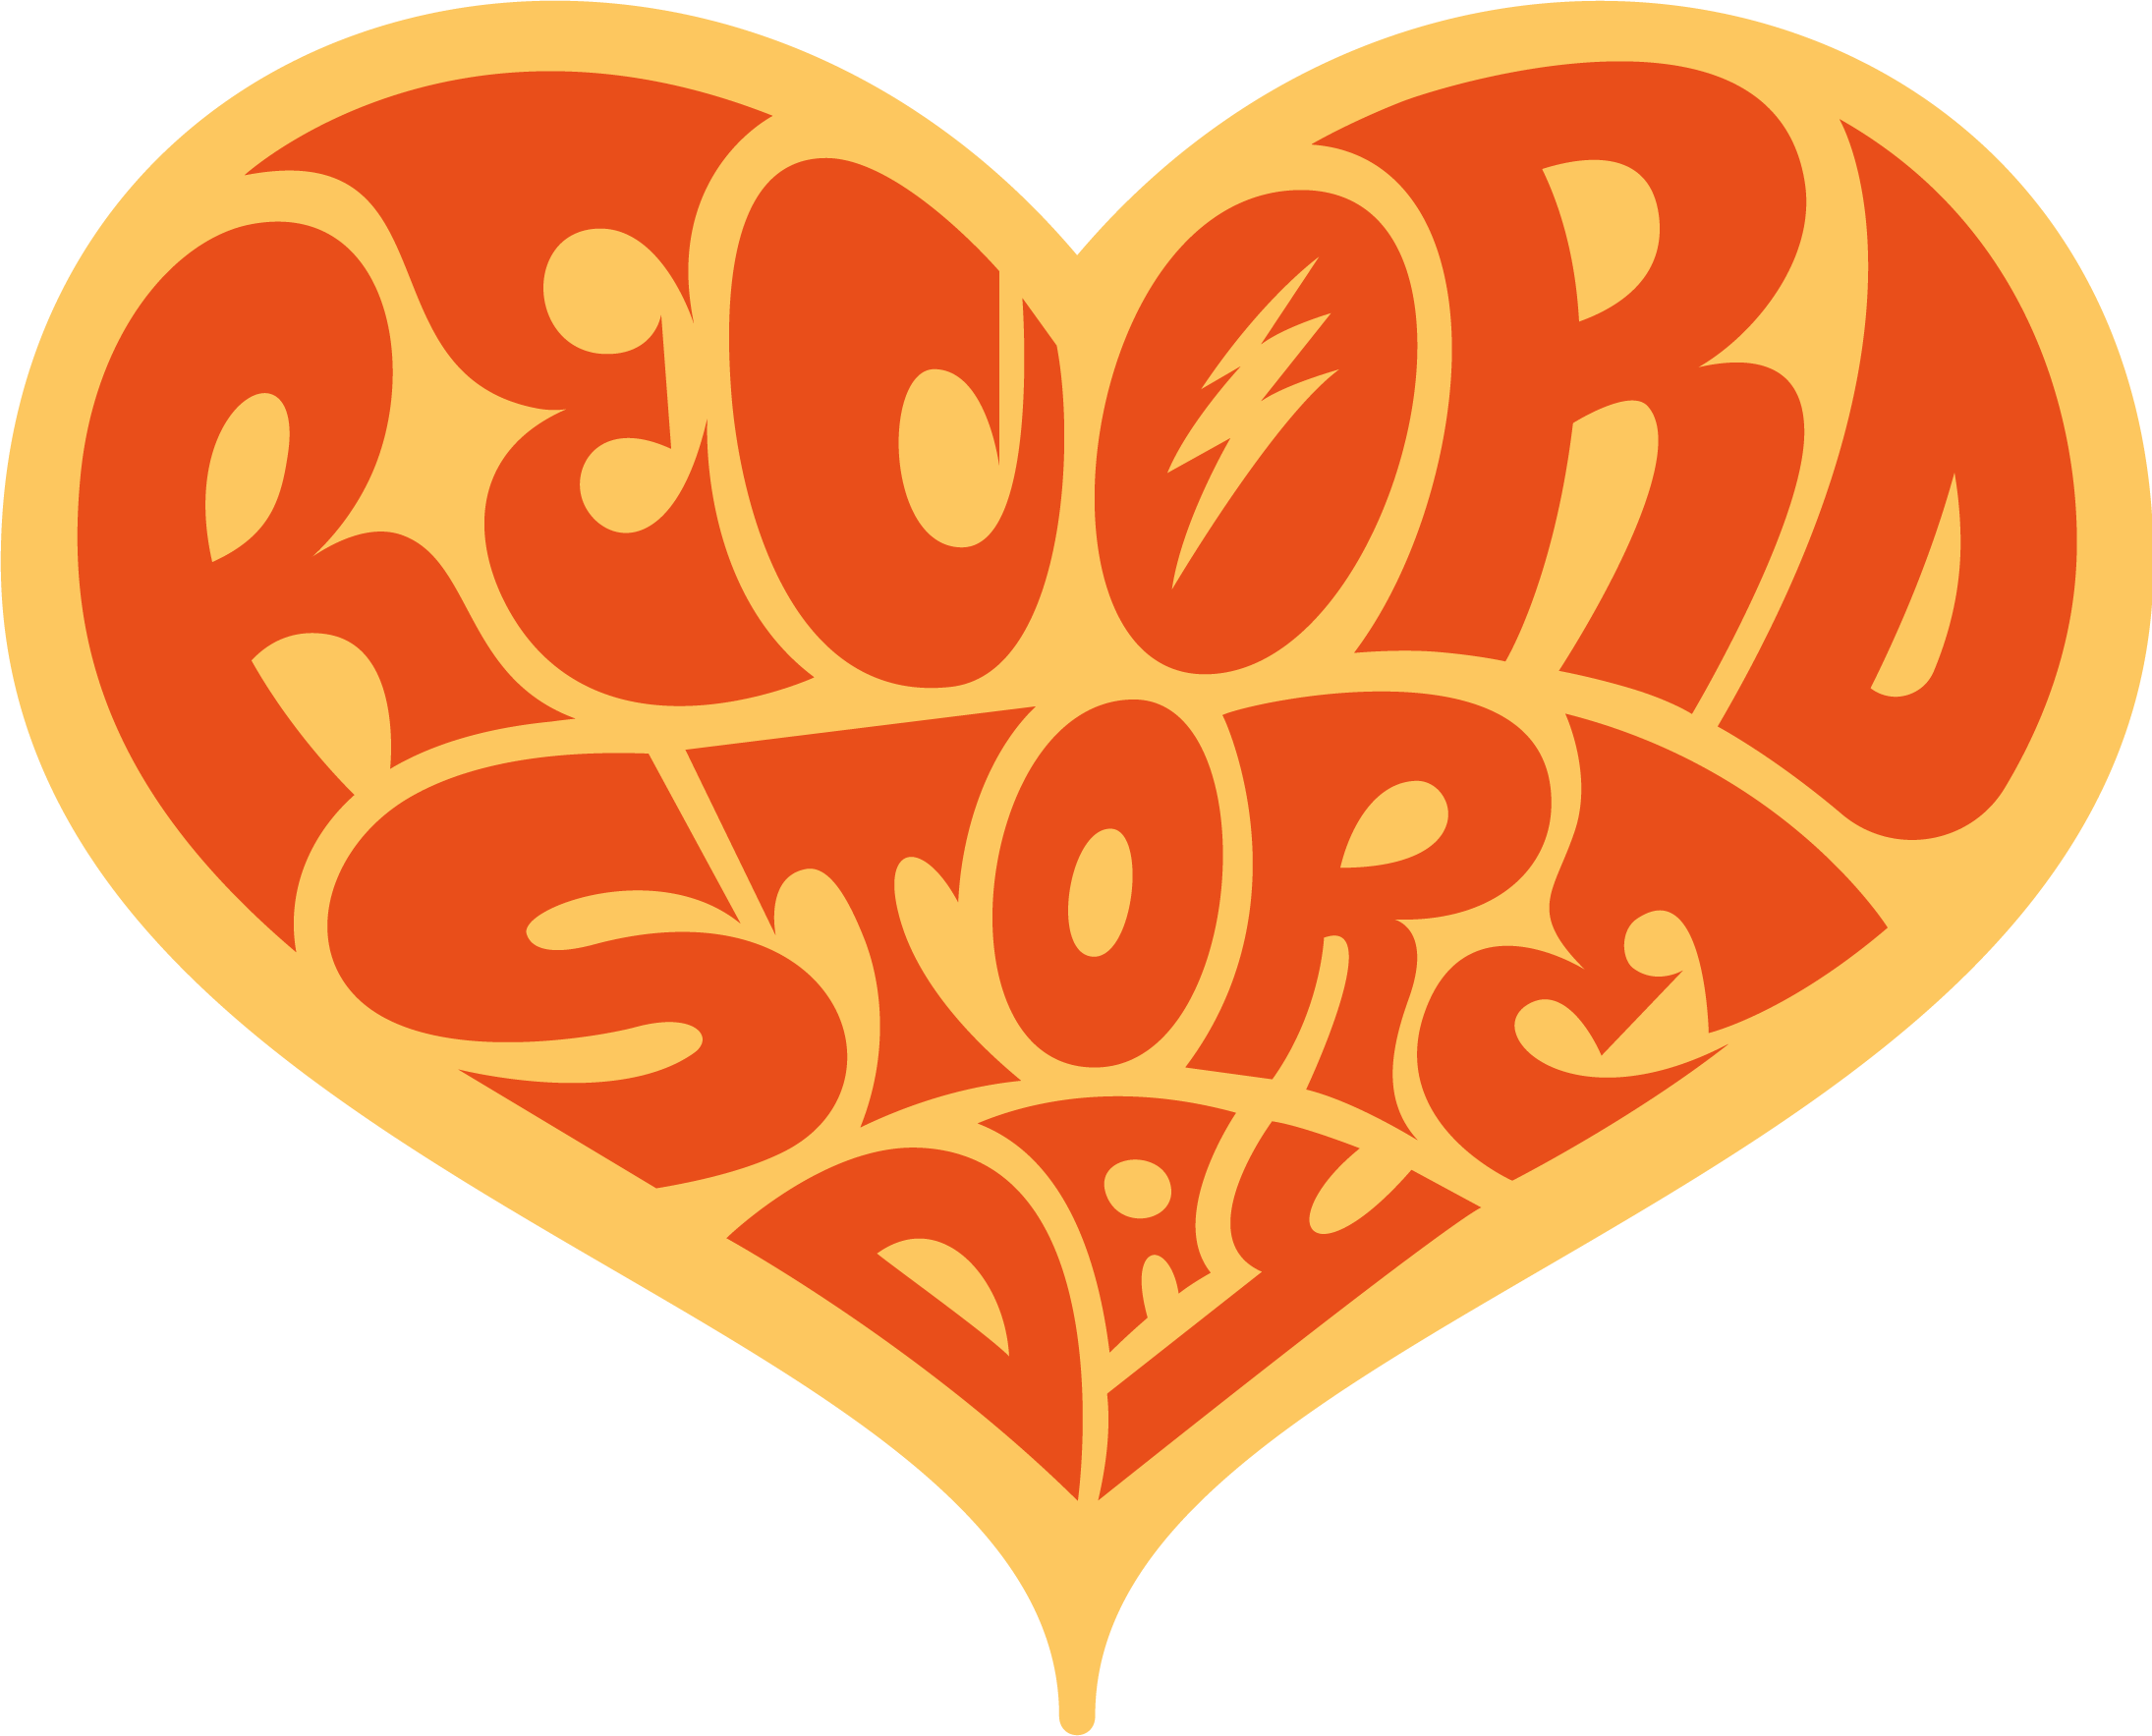 Record Store Day Hoorn